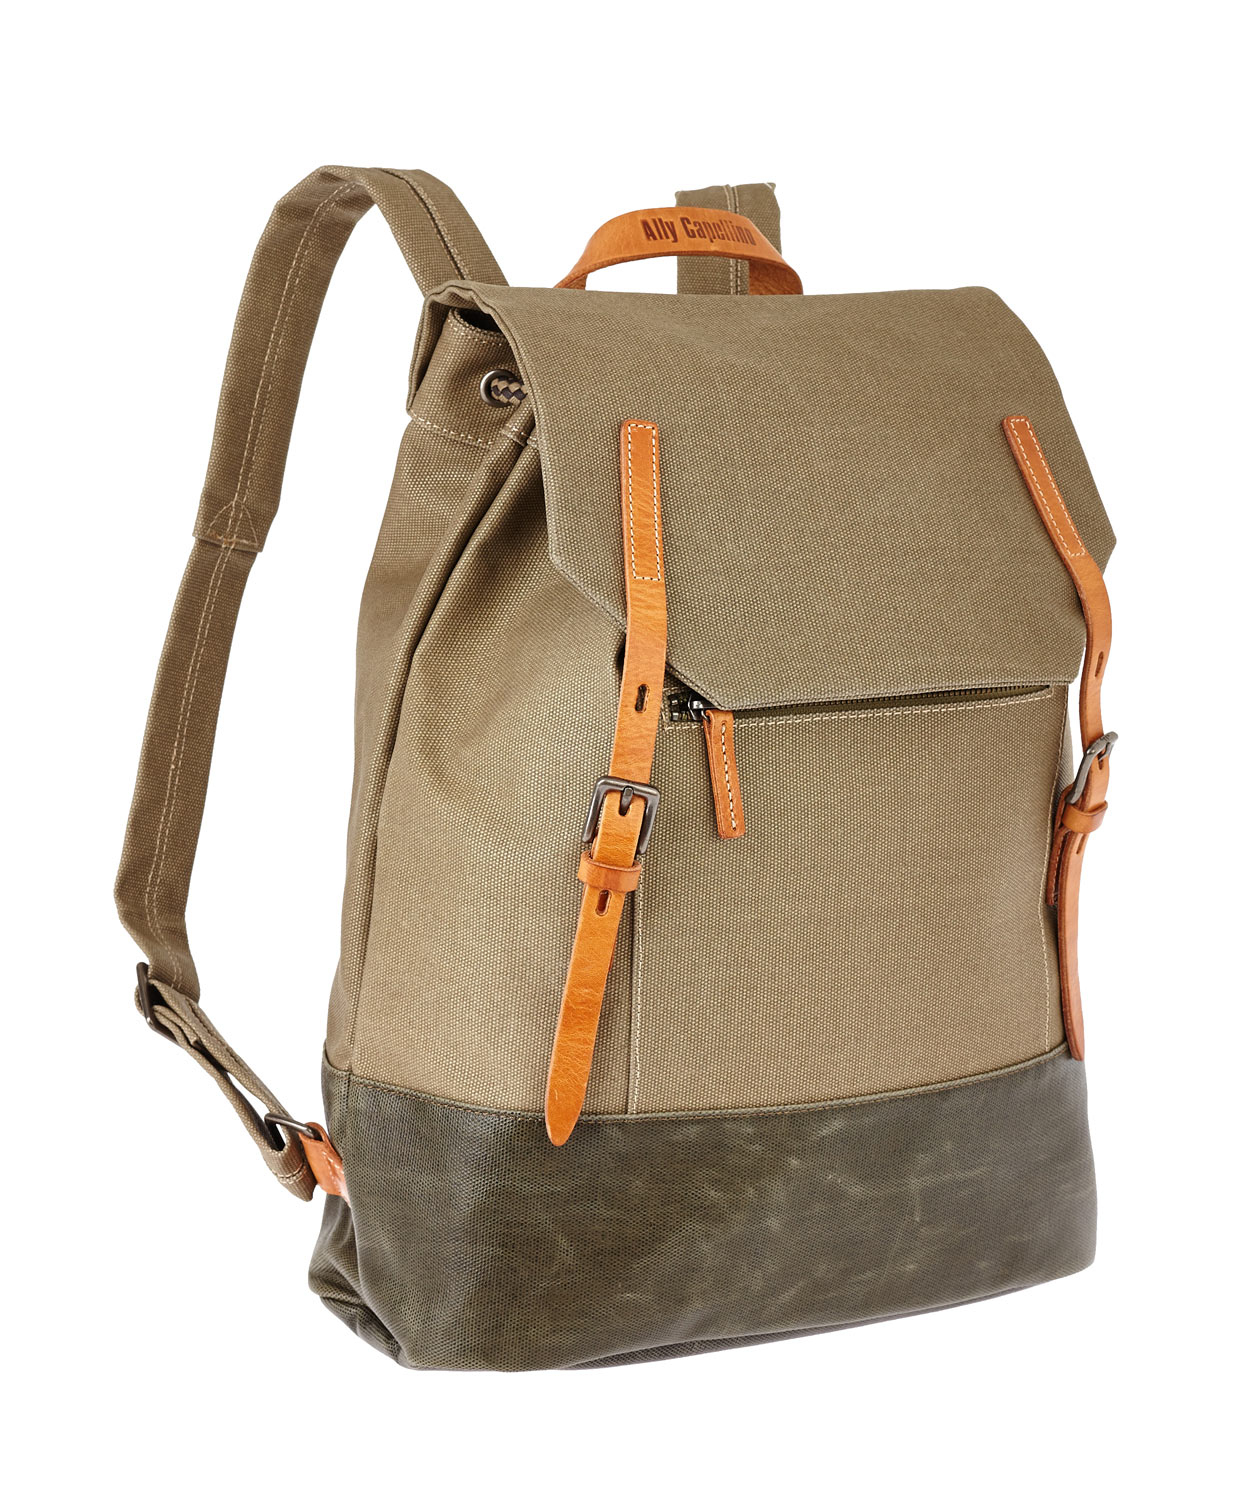 Lyst - Ally Capellino Khaki Dean Waxed Canvas Backpack in Green for Men